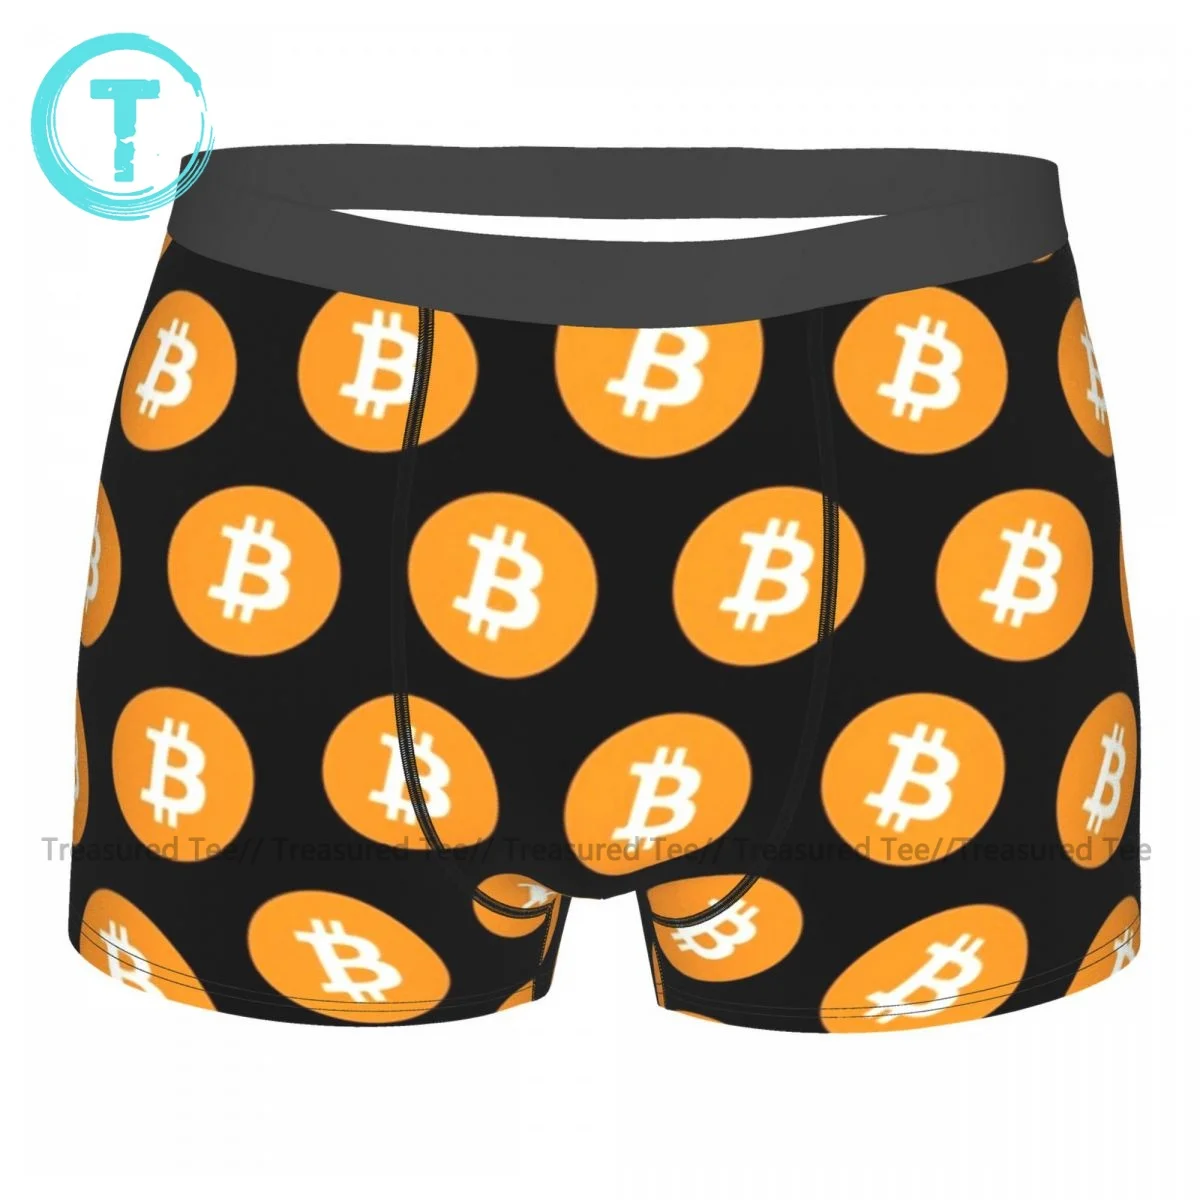 Bitcoin Underwear Breathable Hot Print Trunk Polyester Sublimation Men Boxer Brief